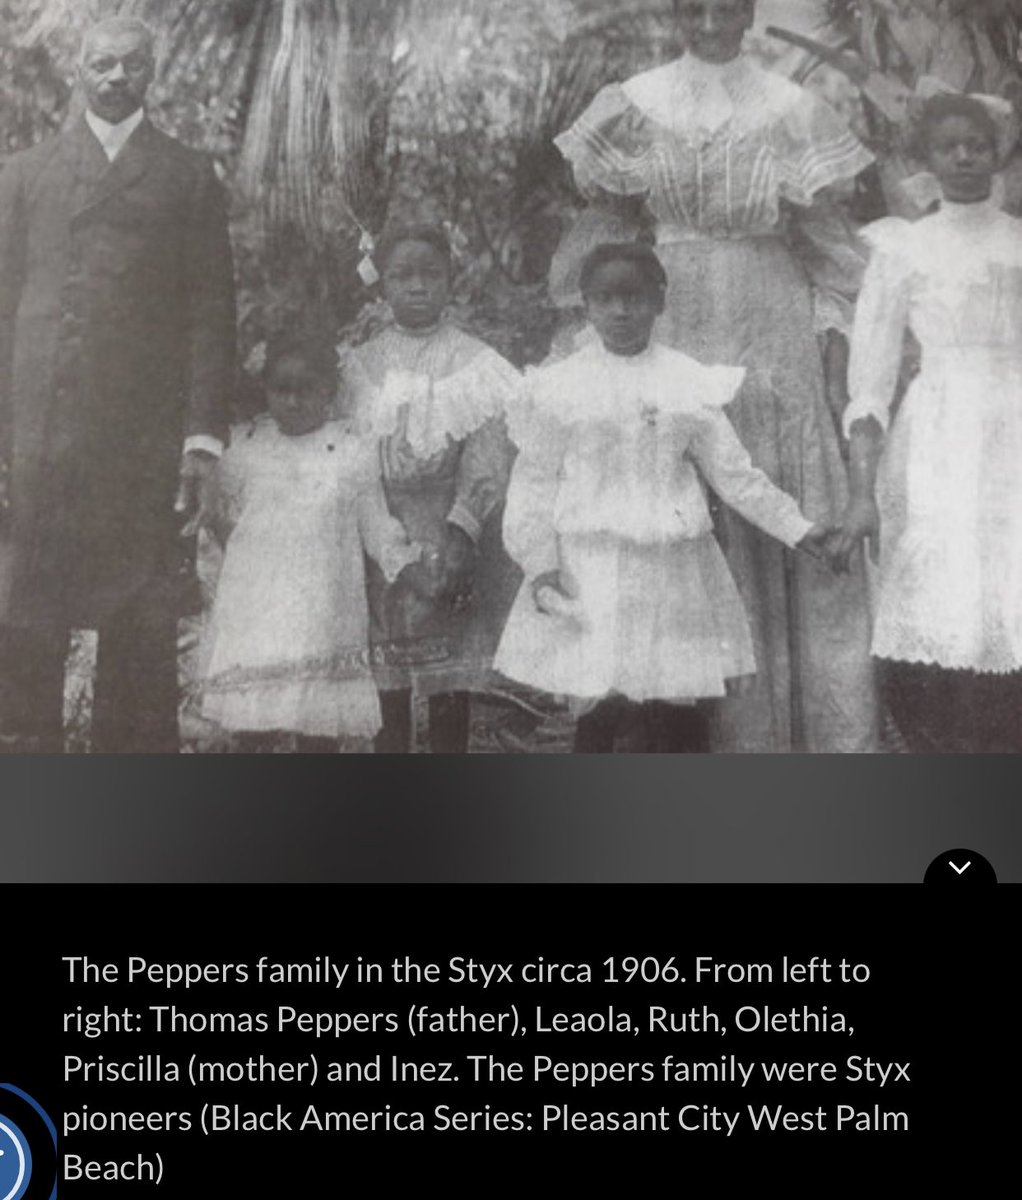 Here’s one of the families from the area. The Peppers Family. 1906. Source:  https://cbs12.com/amp/news/local/the-history-of-pleasant-city